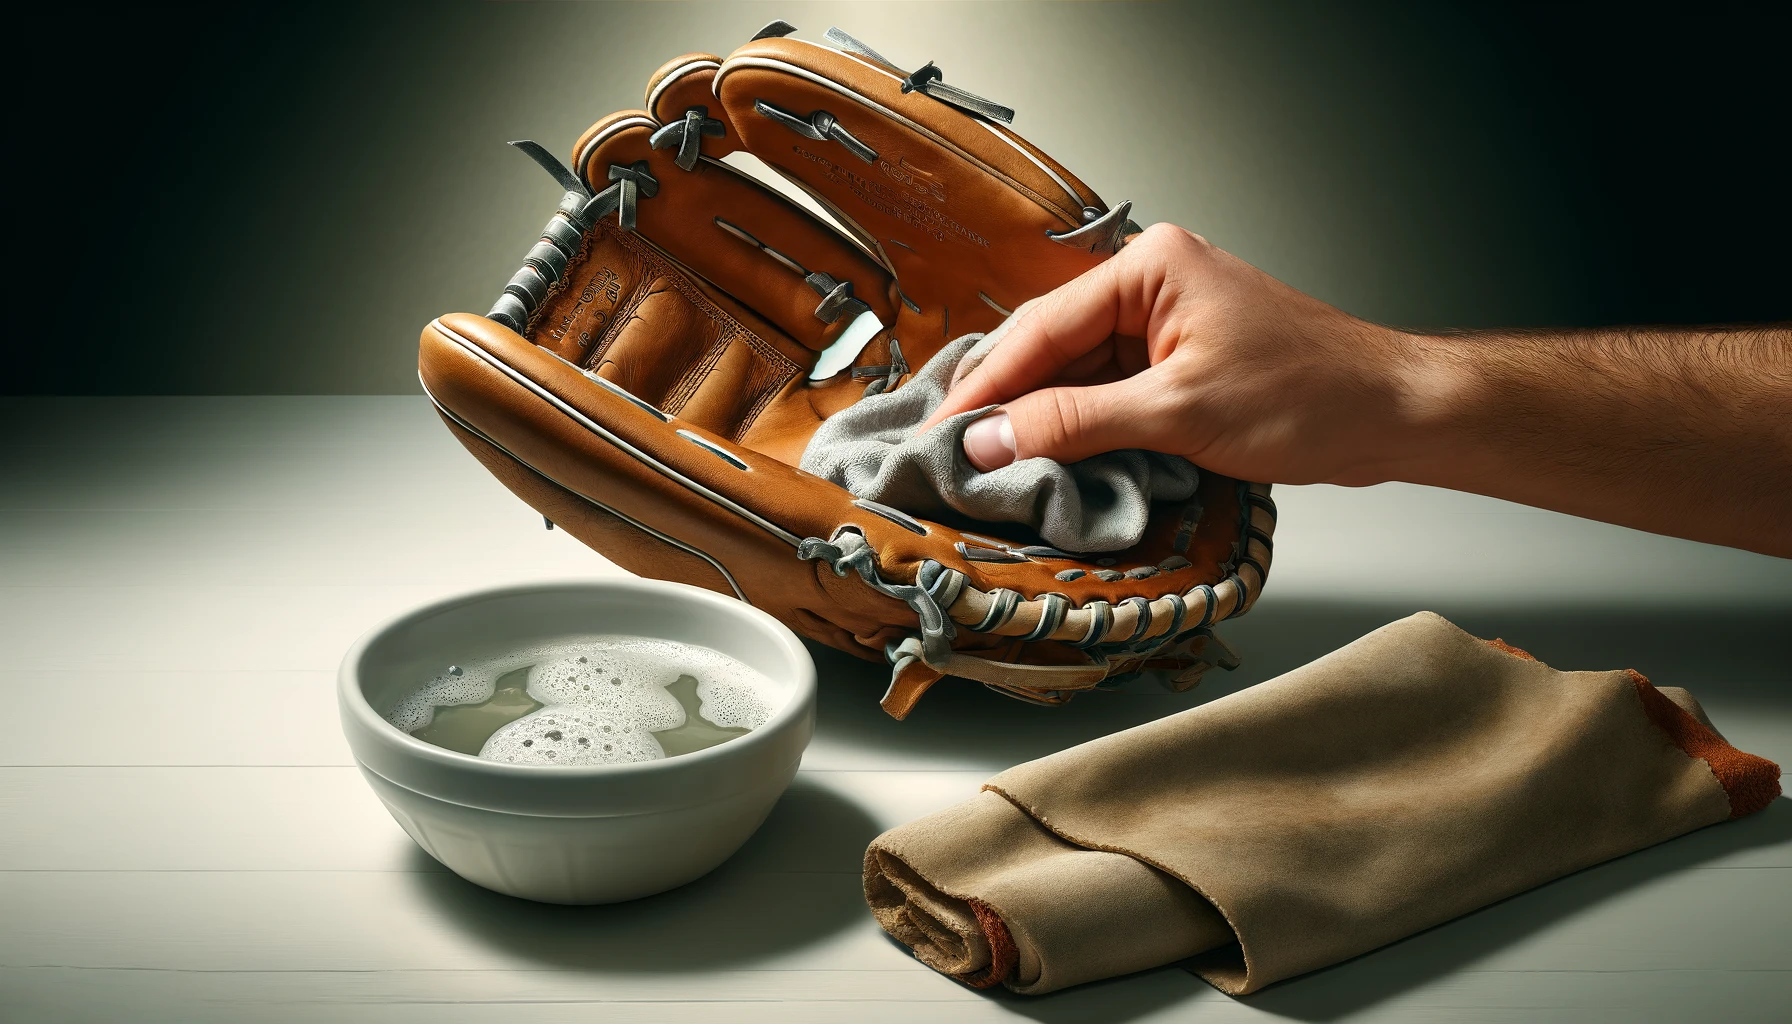 How to Clean the Inside of a Baseball Glove? Step-By-Step!